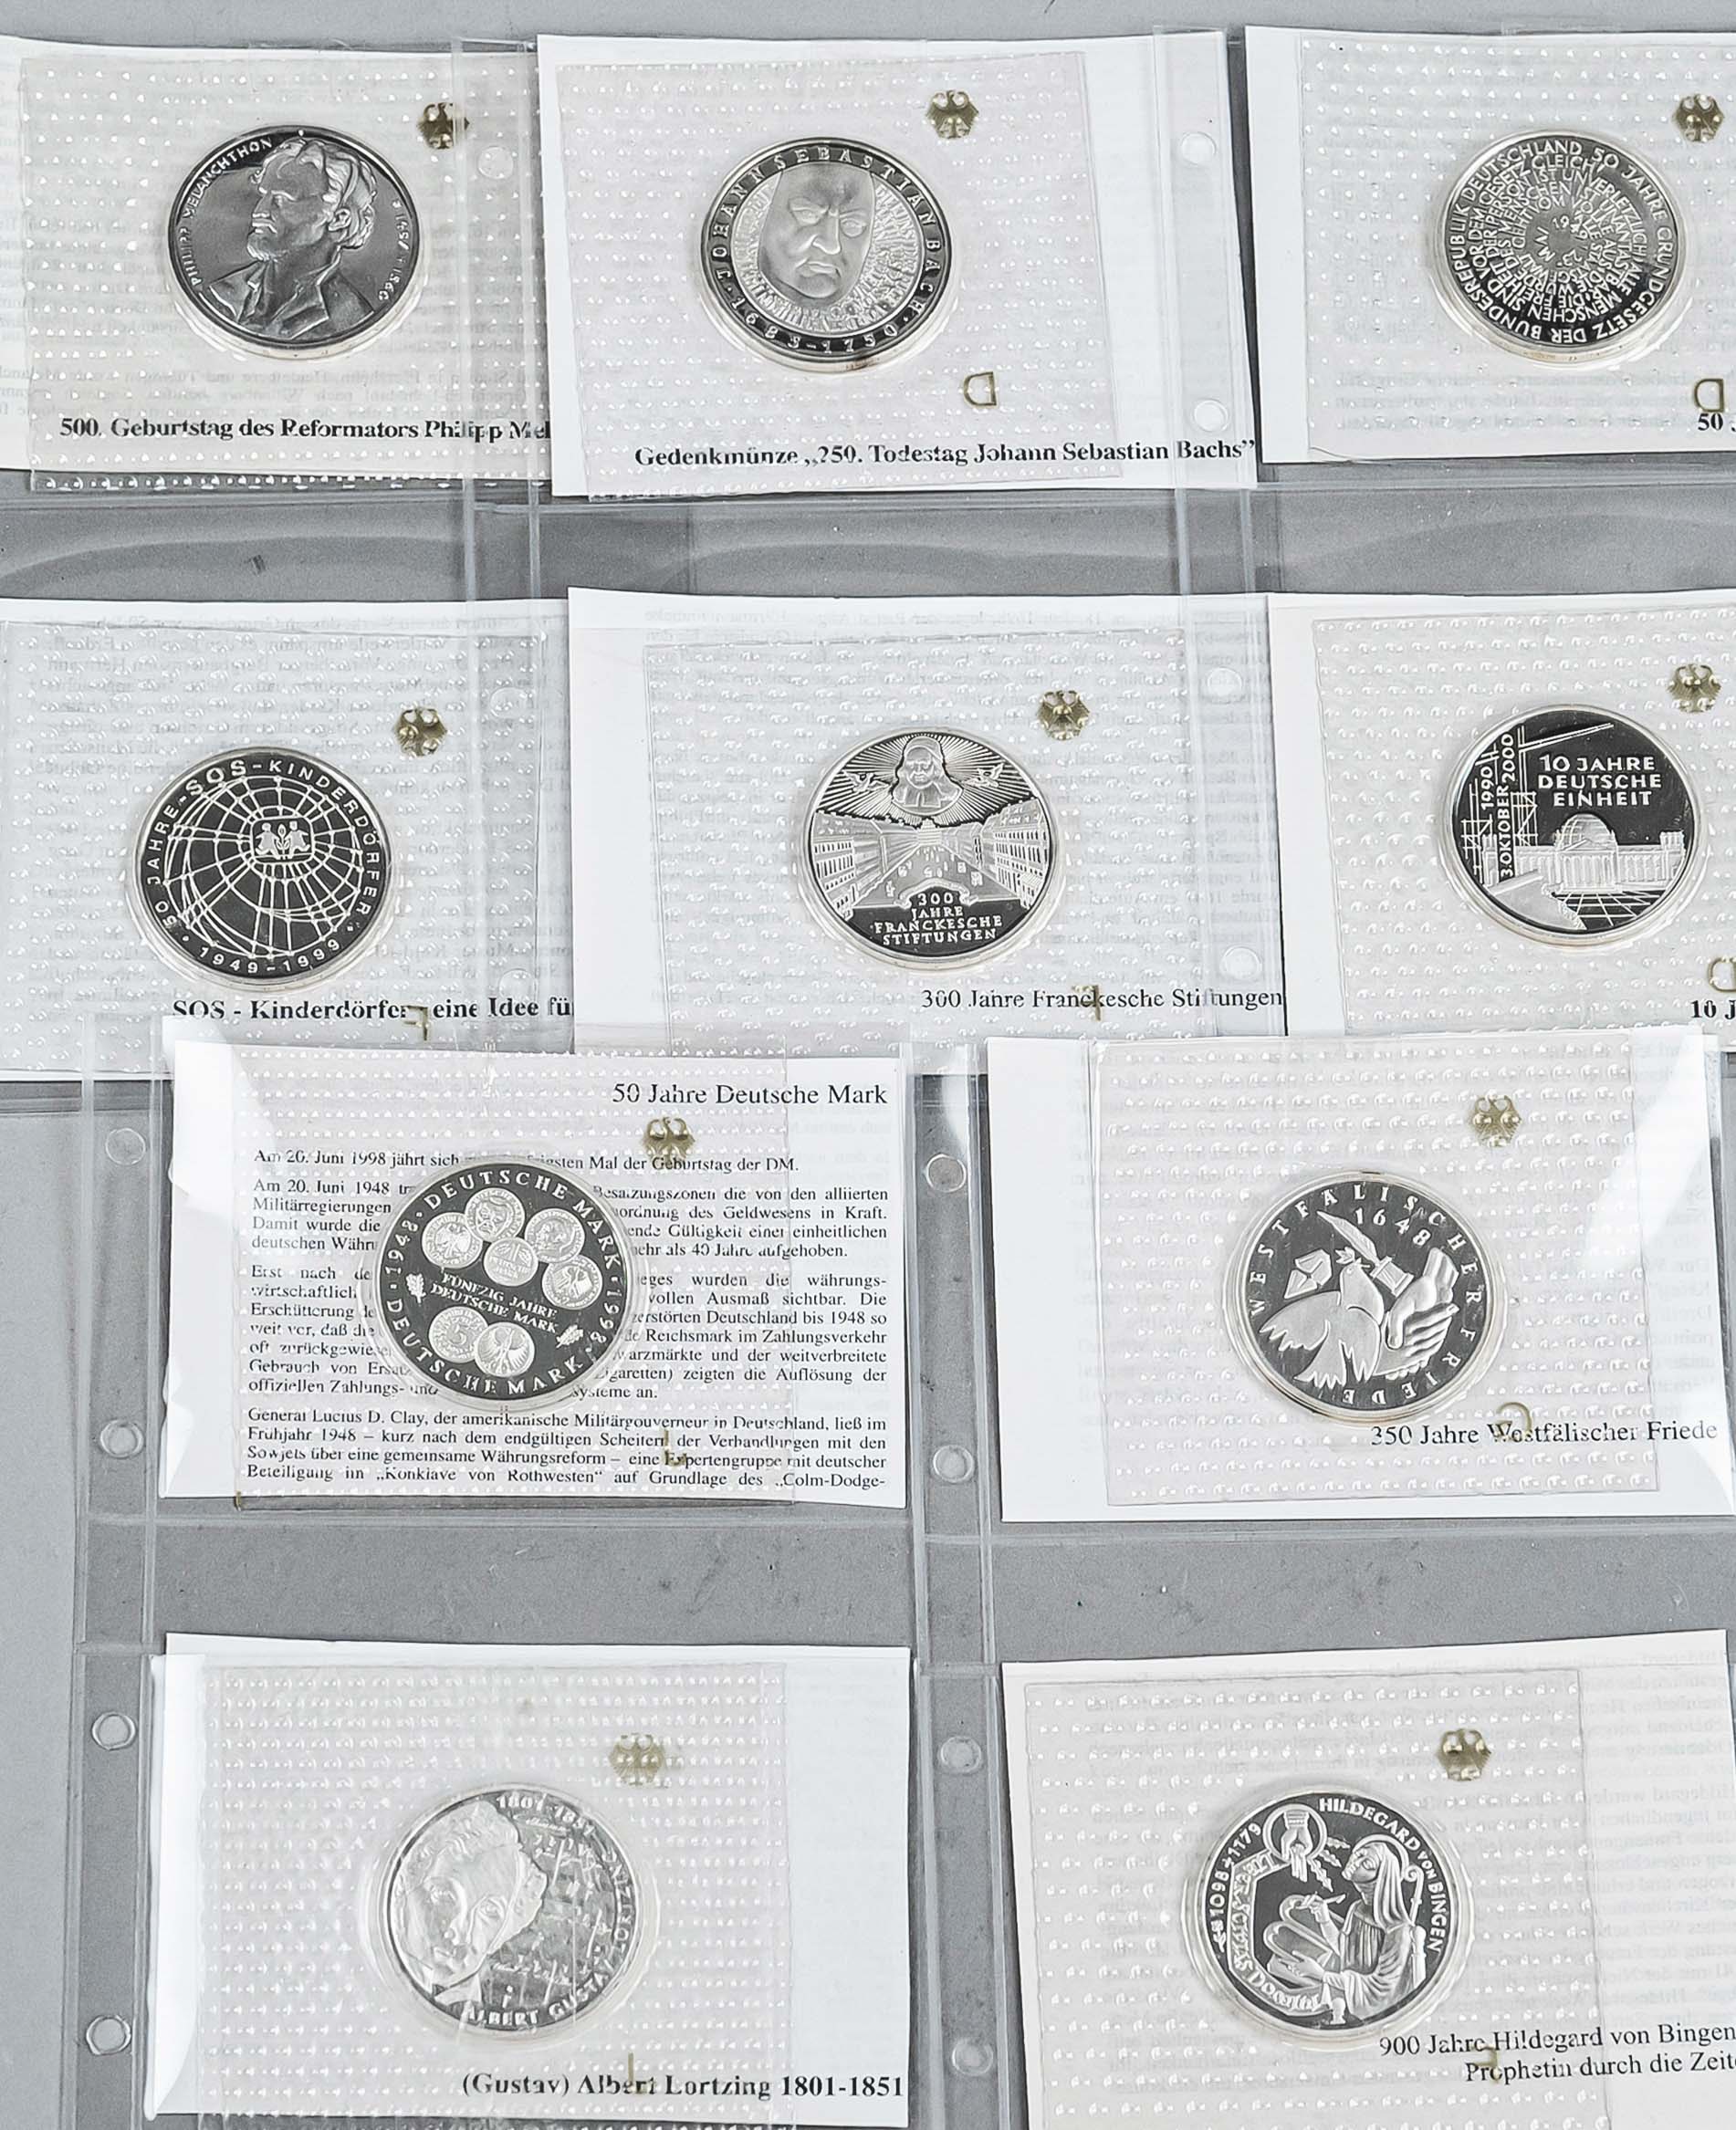 10 x 10 DM commemorative coins Federal Republic of Germany, 1997 - 2001, silver coins All different,